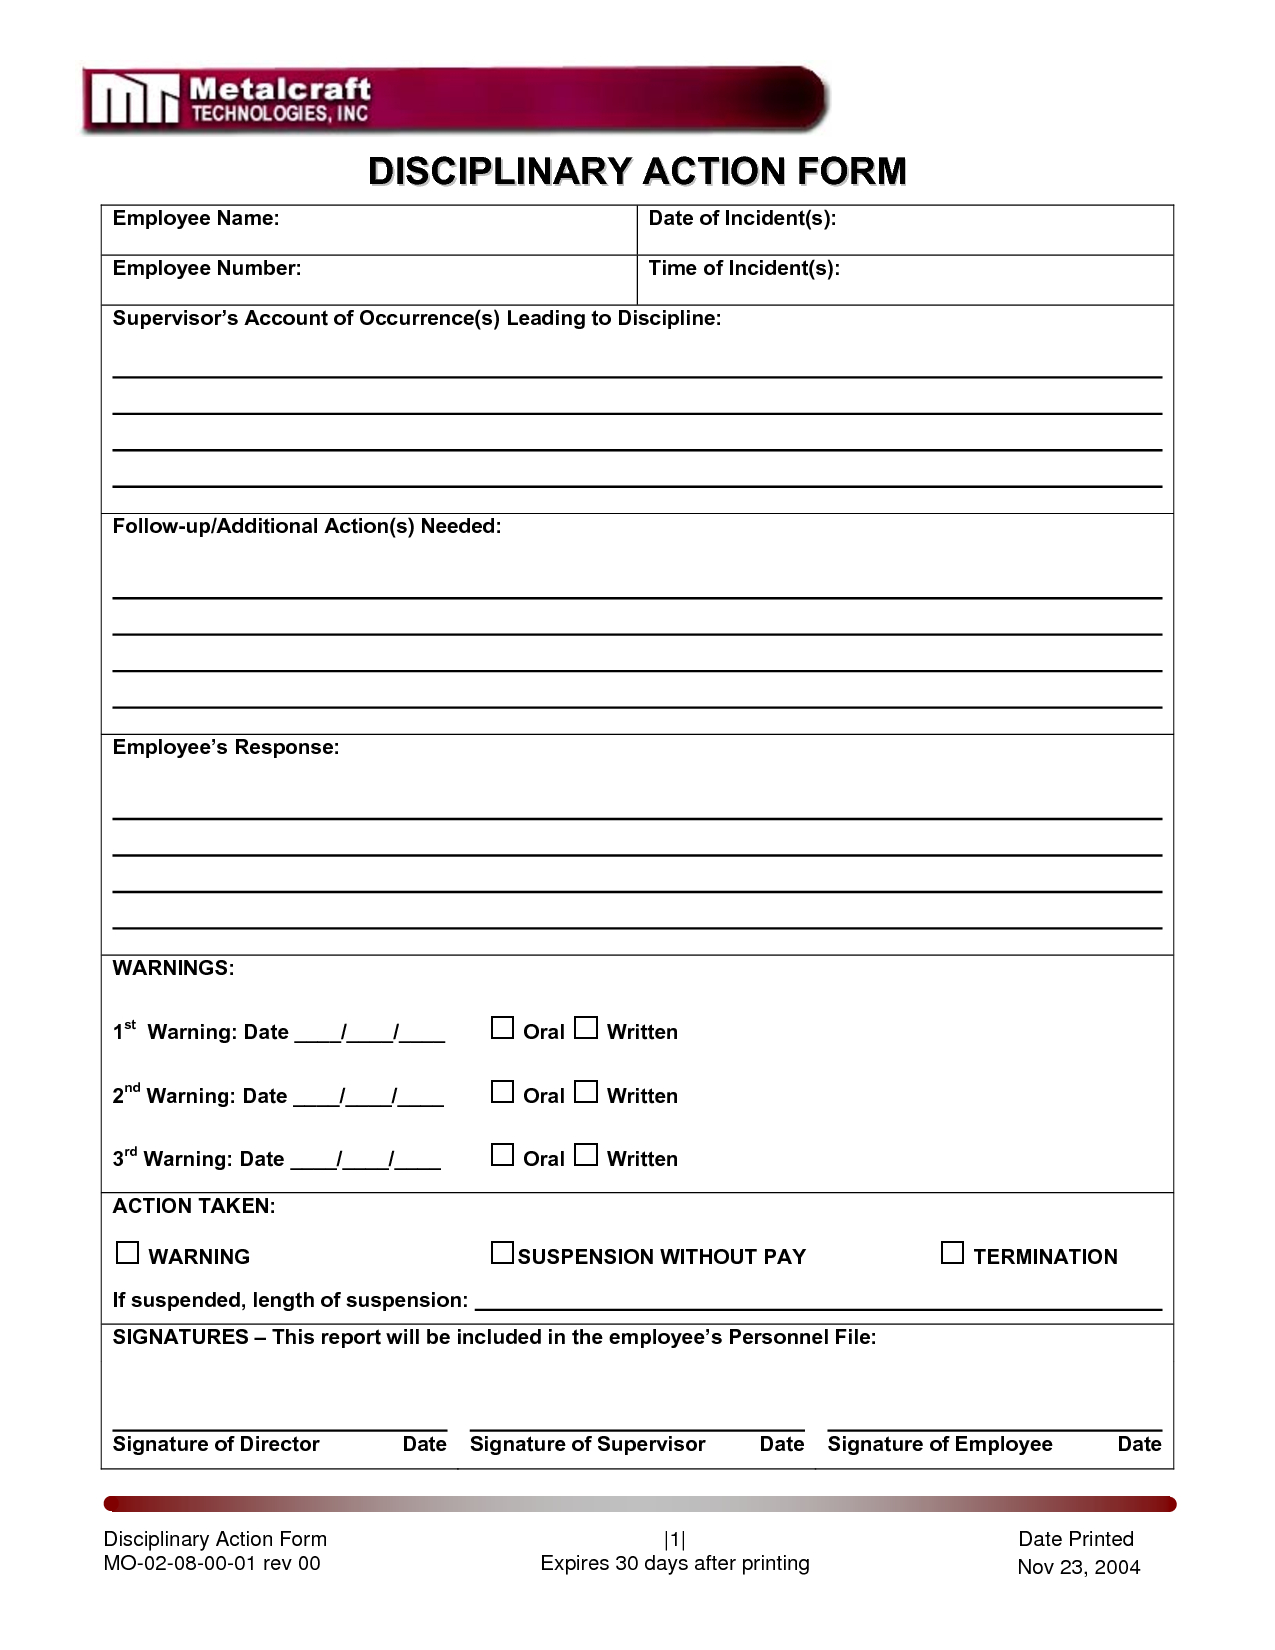 disciplinary-action-form-employee-forms-employee-performance-free-printable-hr-forms